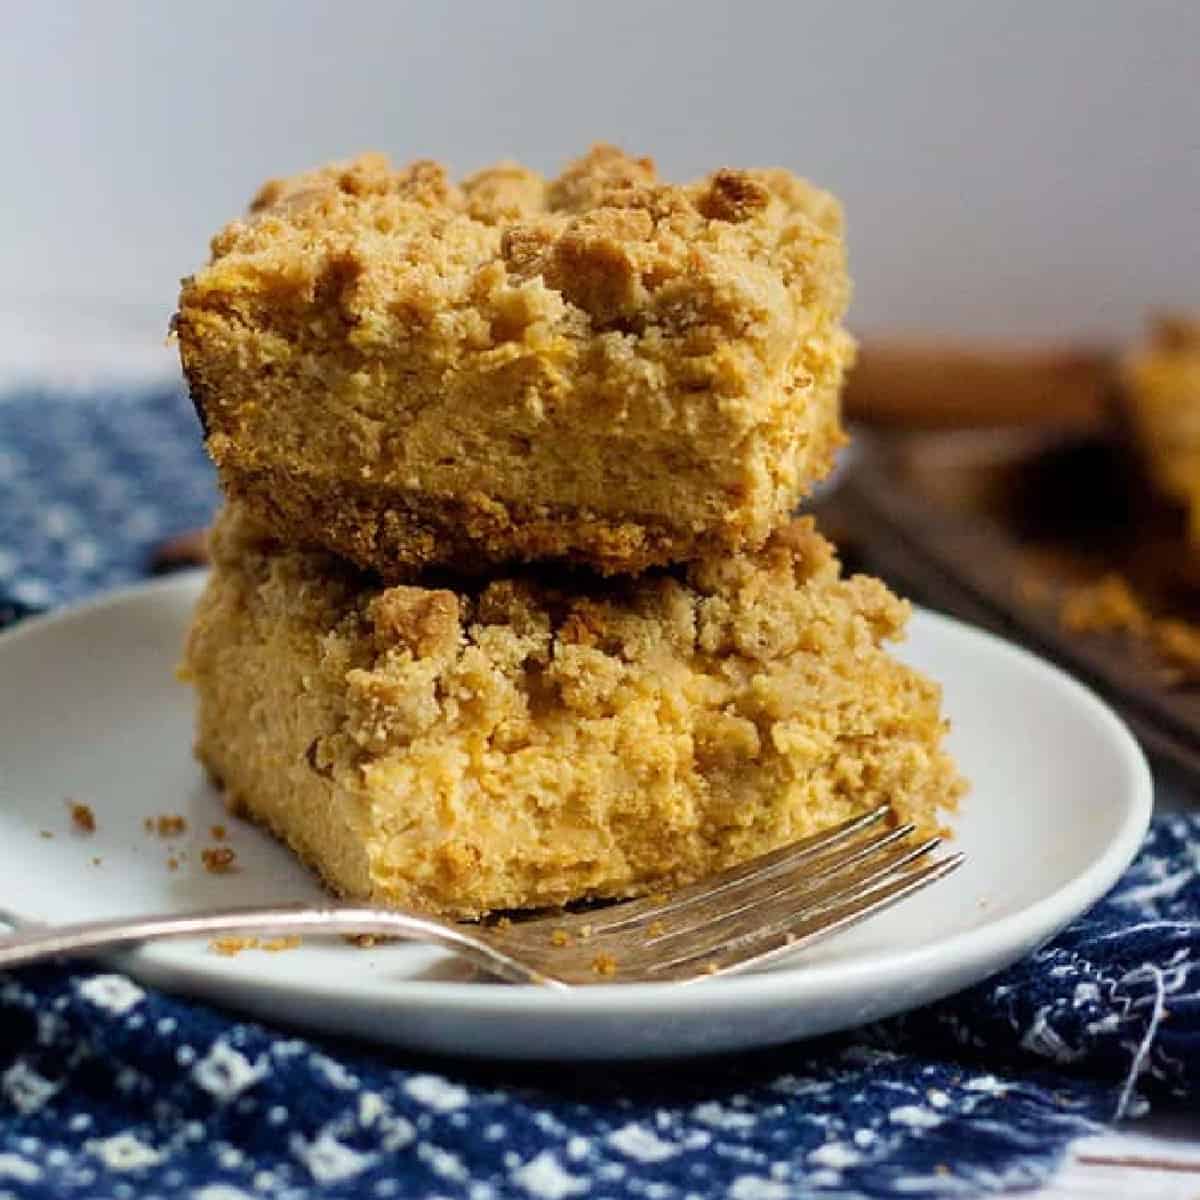 These pumpkin cheesecake bars are so simple and easy to make. Buttery graham crackers crust topped with luscious pumpkin cheesecake is perfect!
